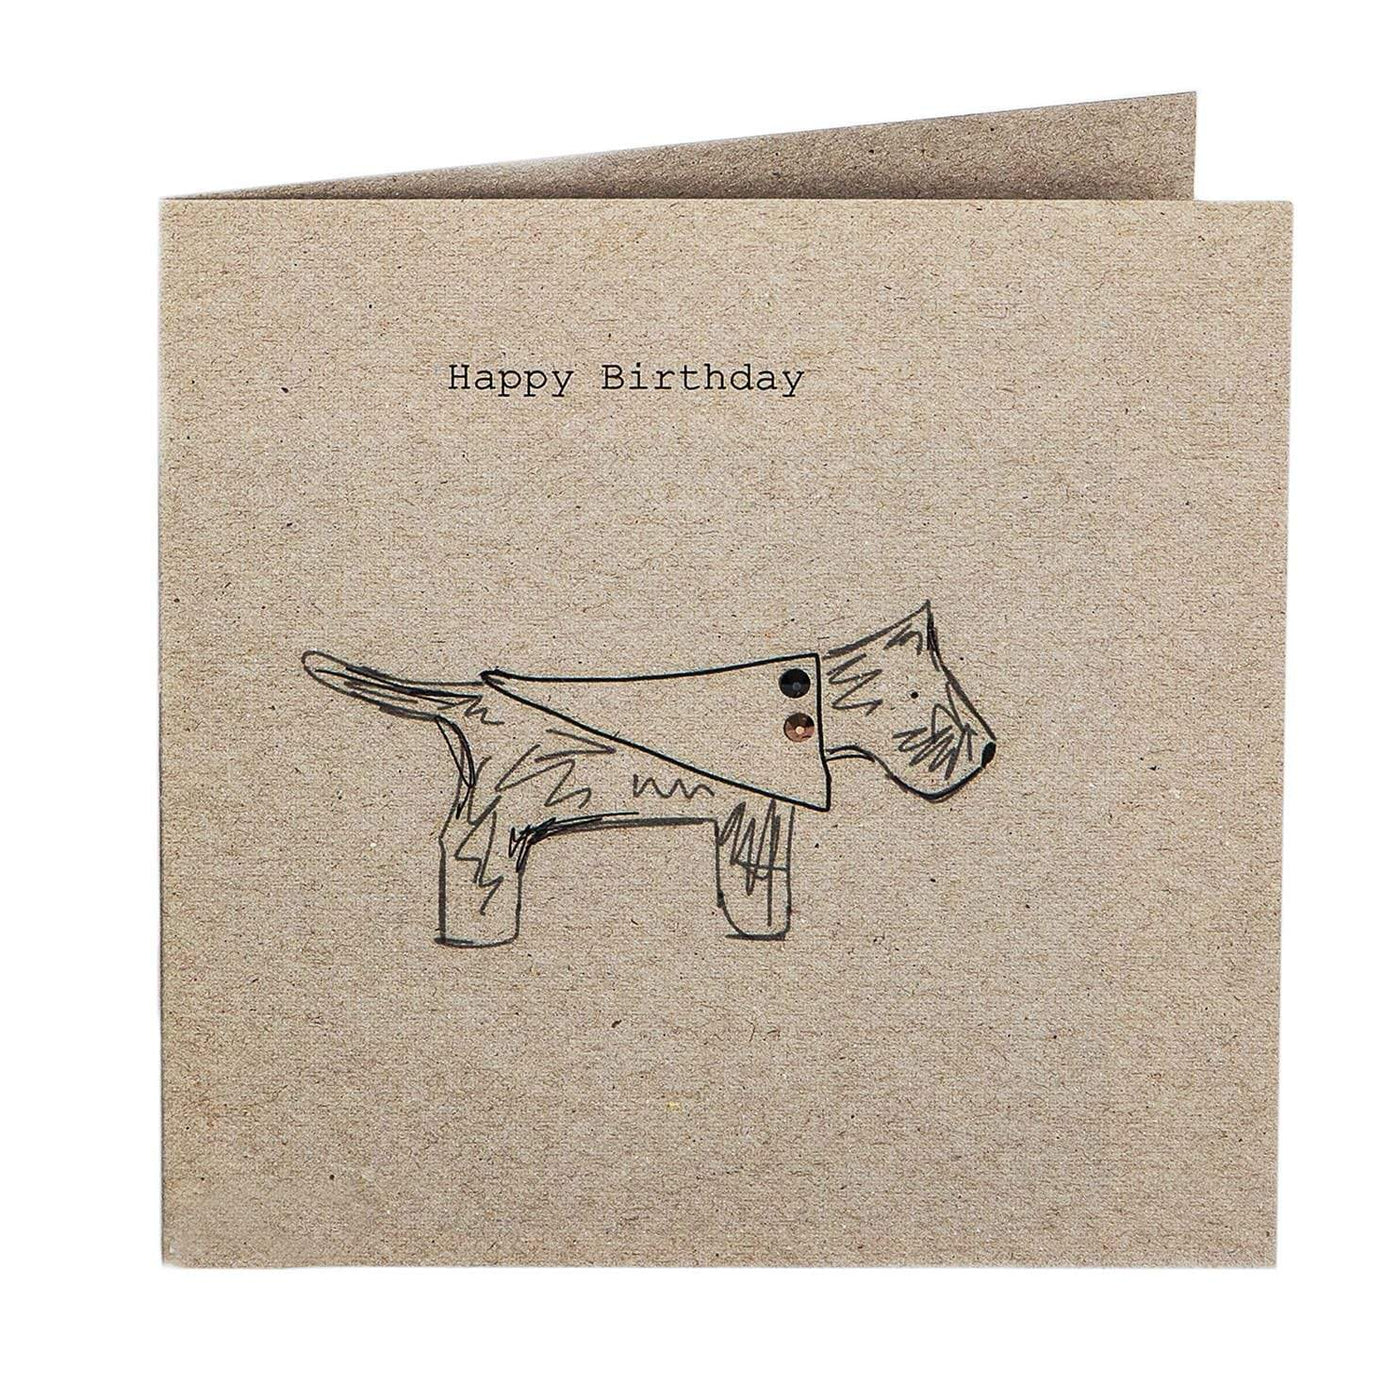 Print Circus Embellished Greetings Card NT06 Happy Birthday (pooch in coat) square hand embellished card